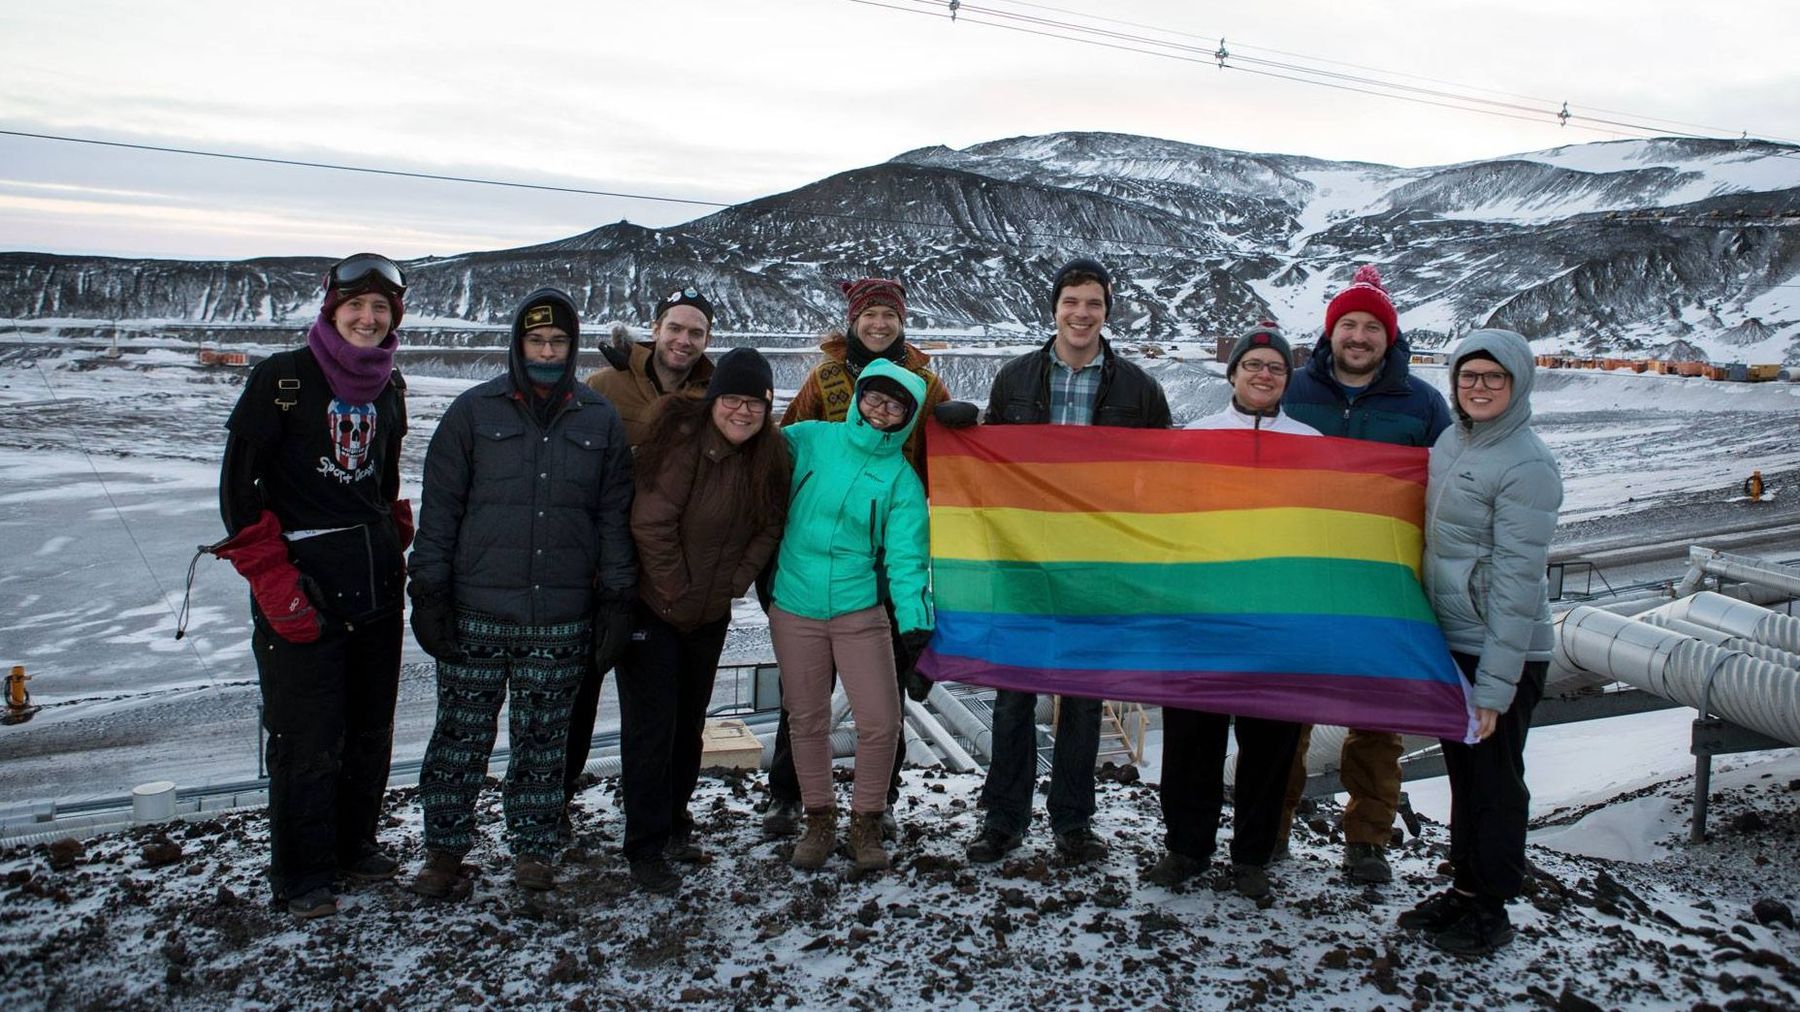 Antarctica is set to have its very first Pride